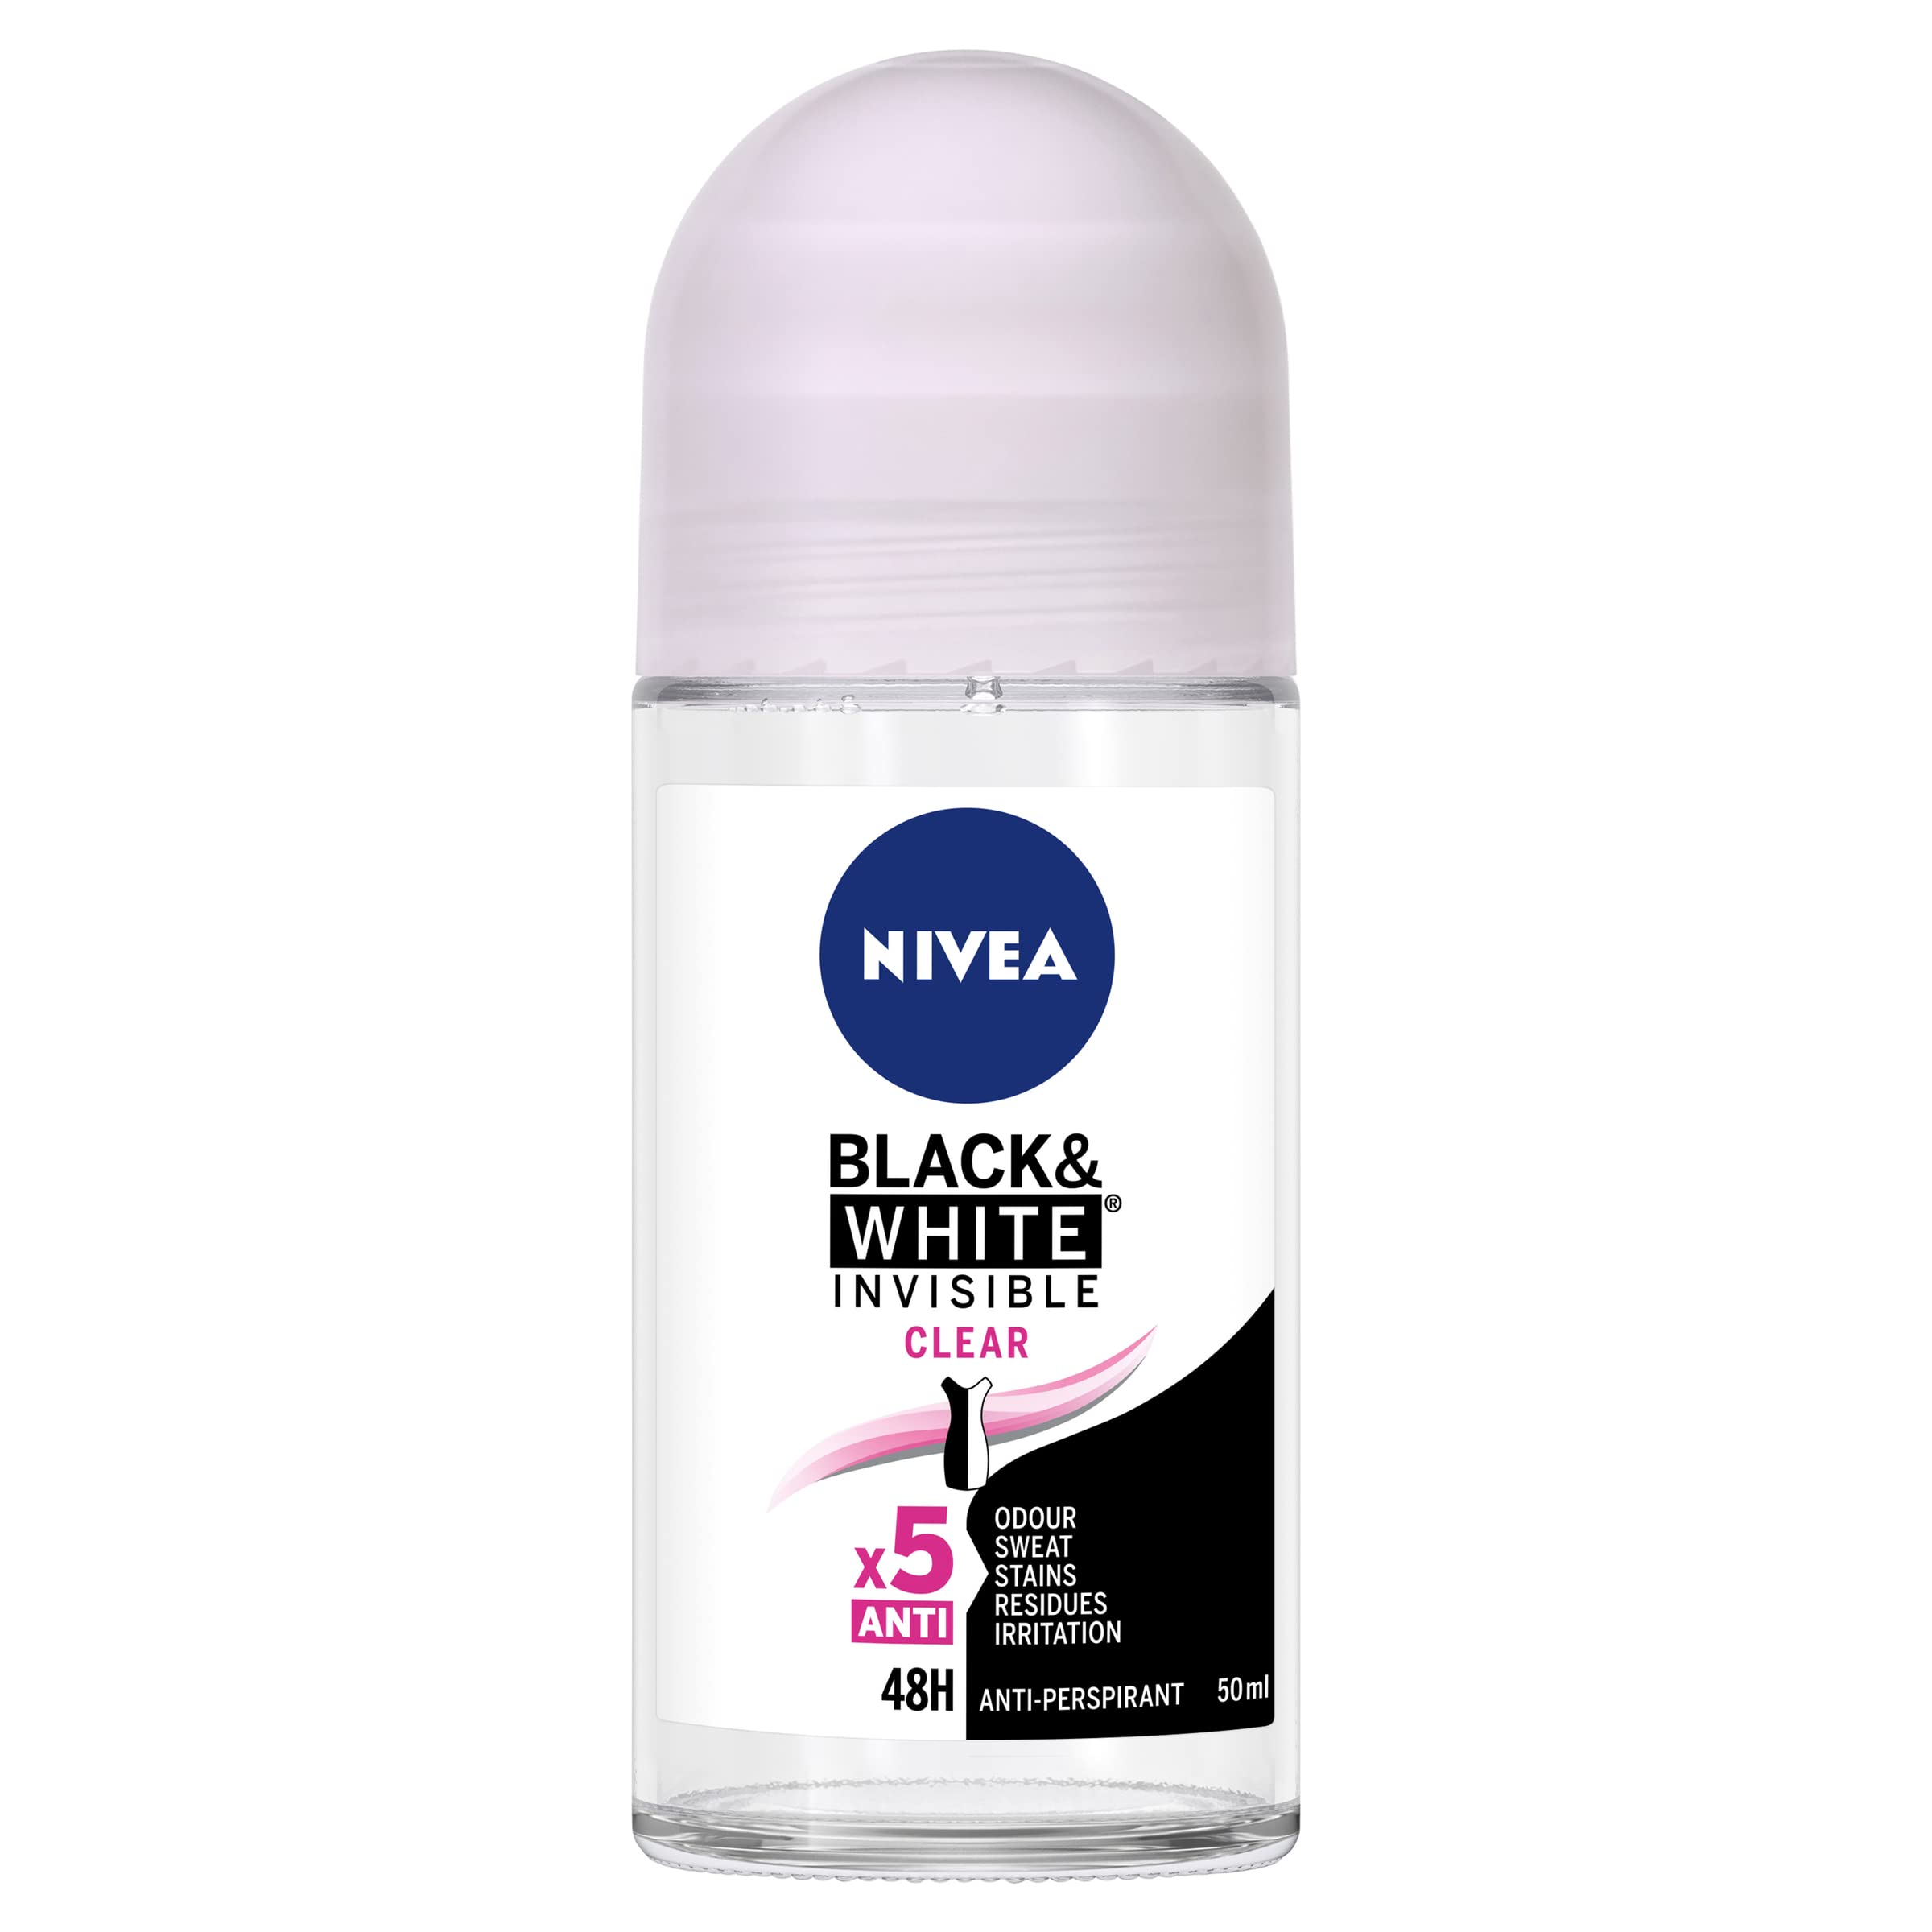 NIVEA Deodorant Invisible Black and White Clear Roll On 50ml